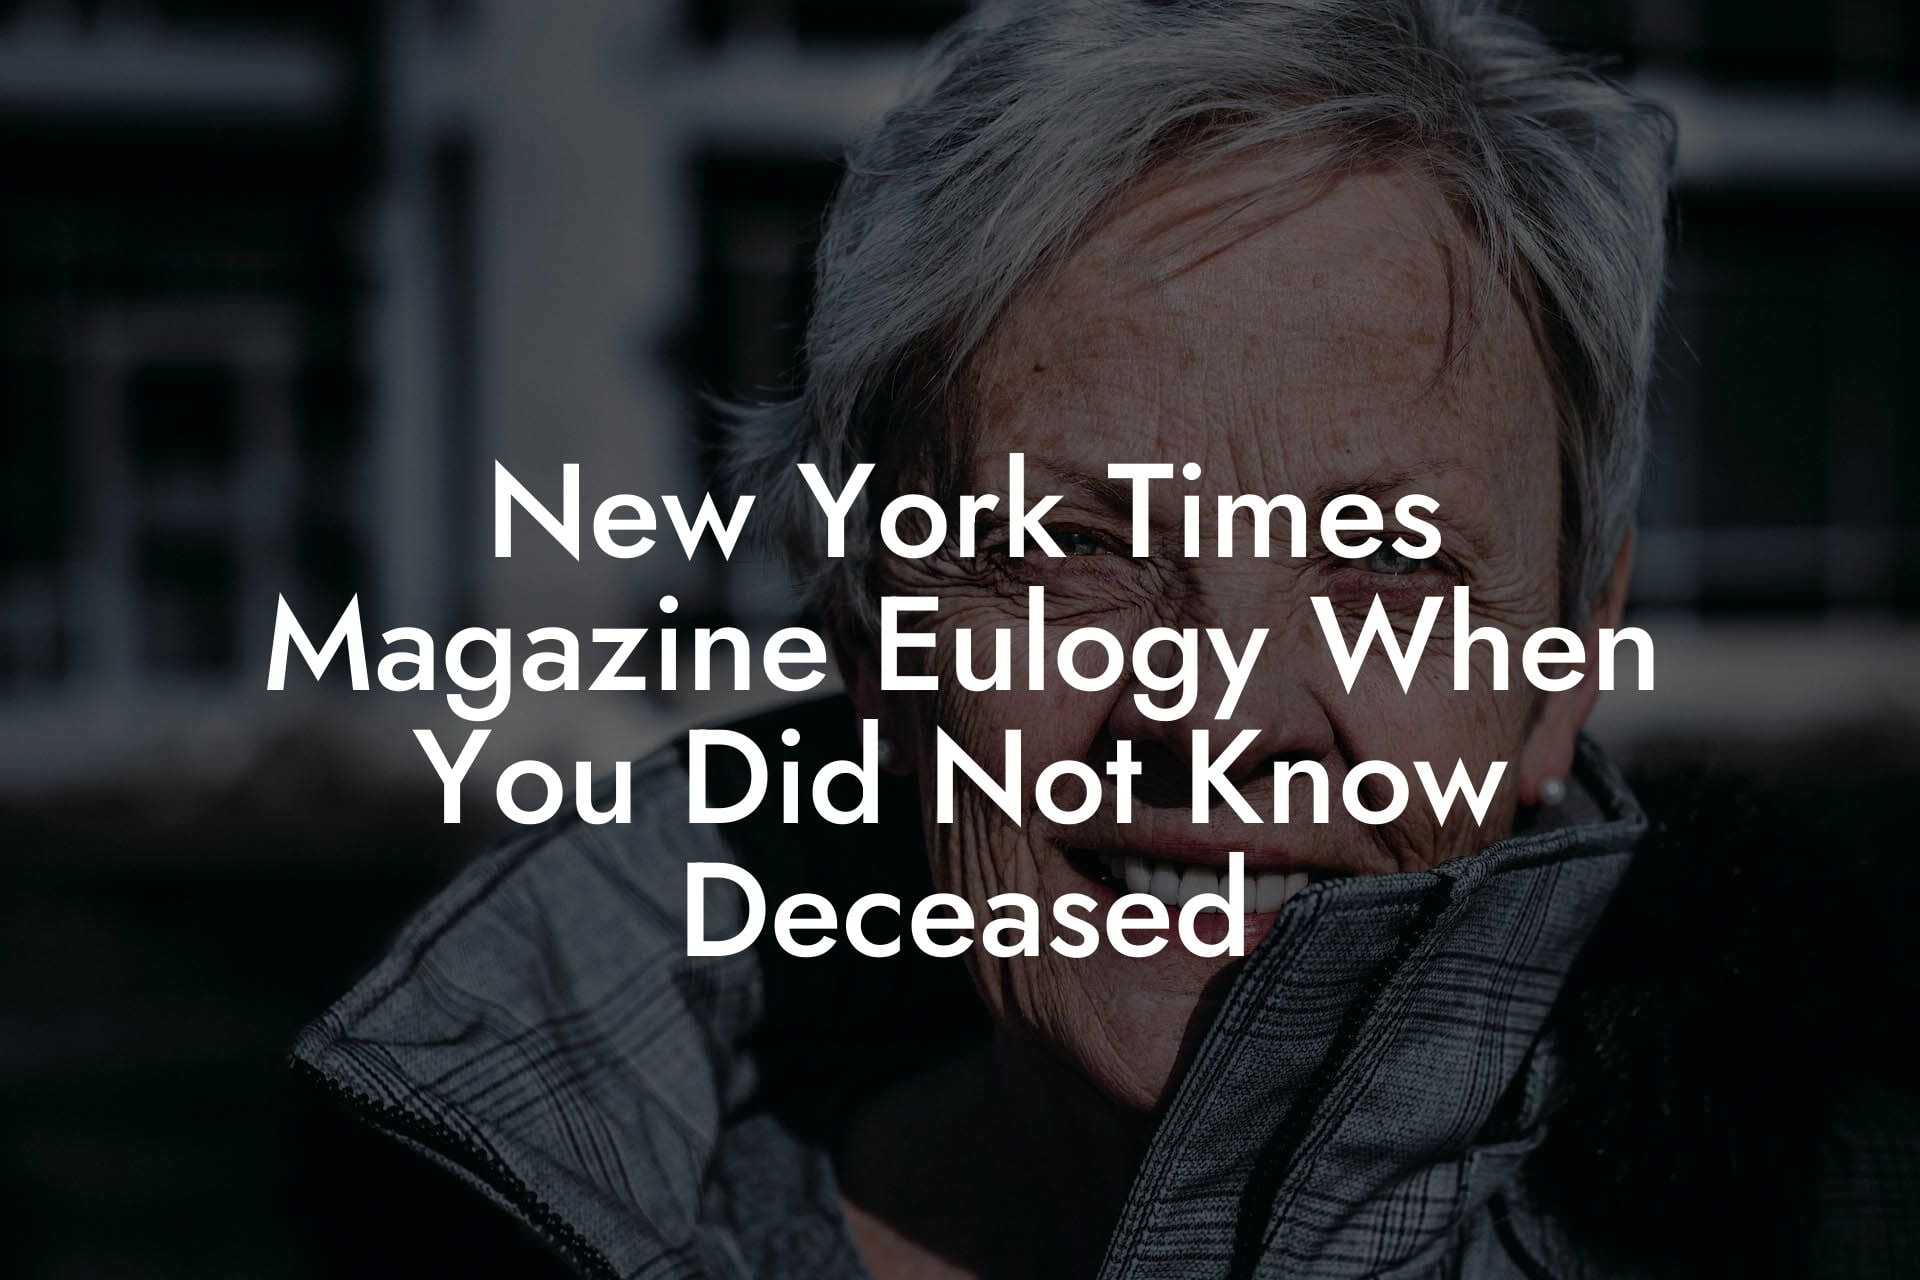 New York Times Magazine Eulogy When You Did Not Know Deceased